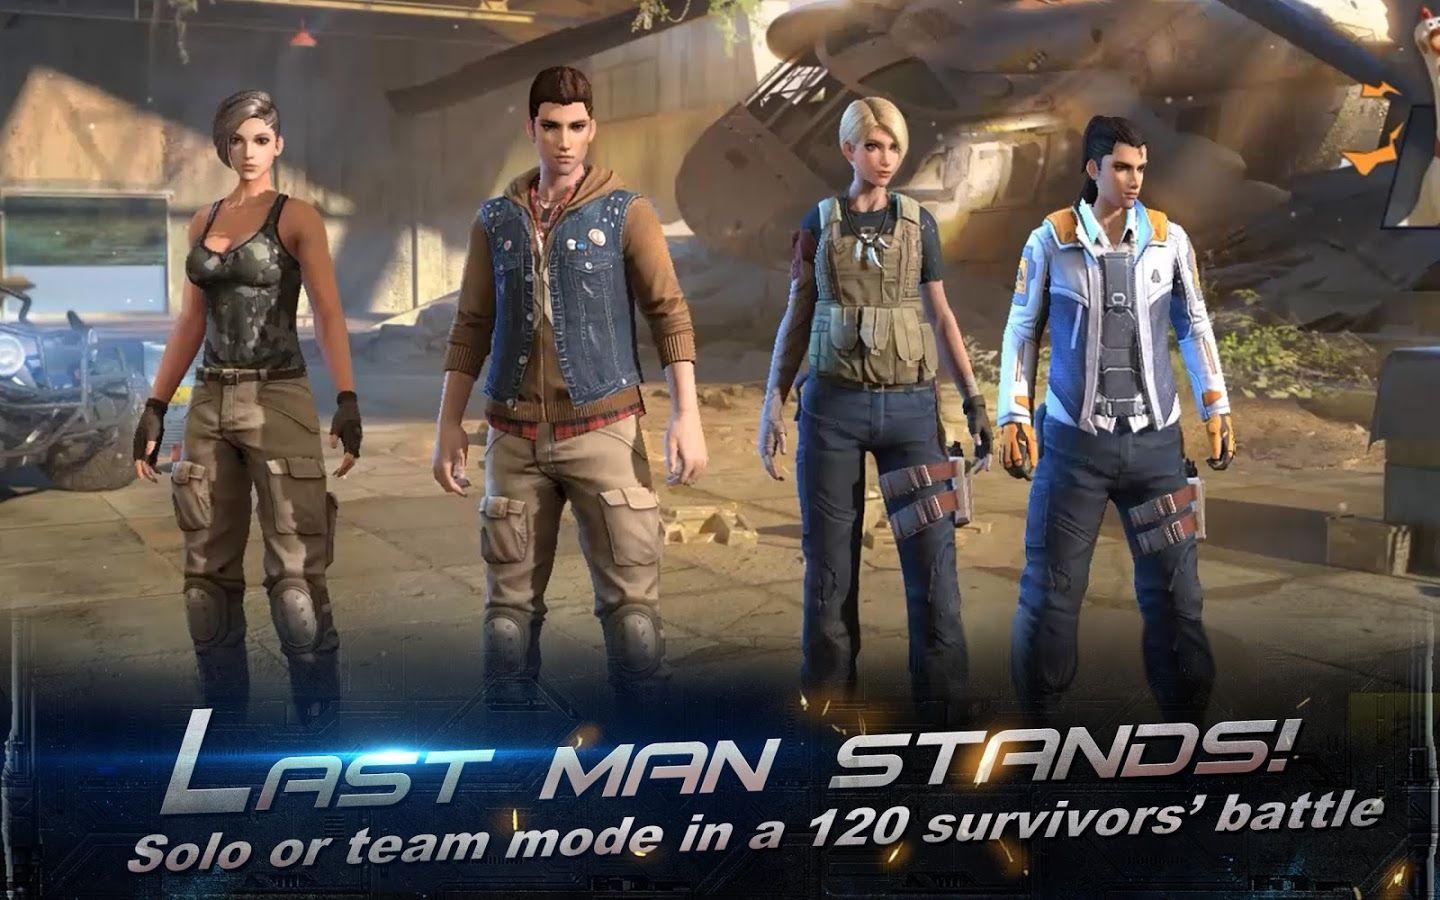 the rules of survival